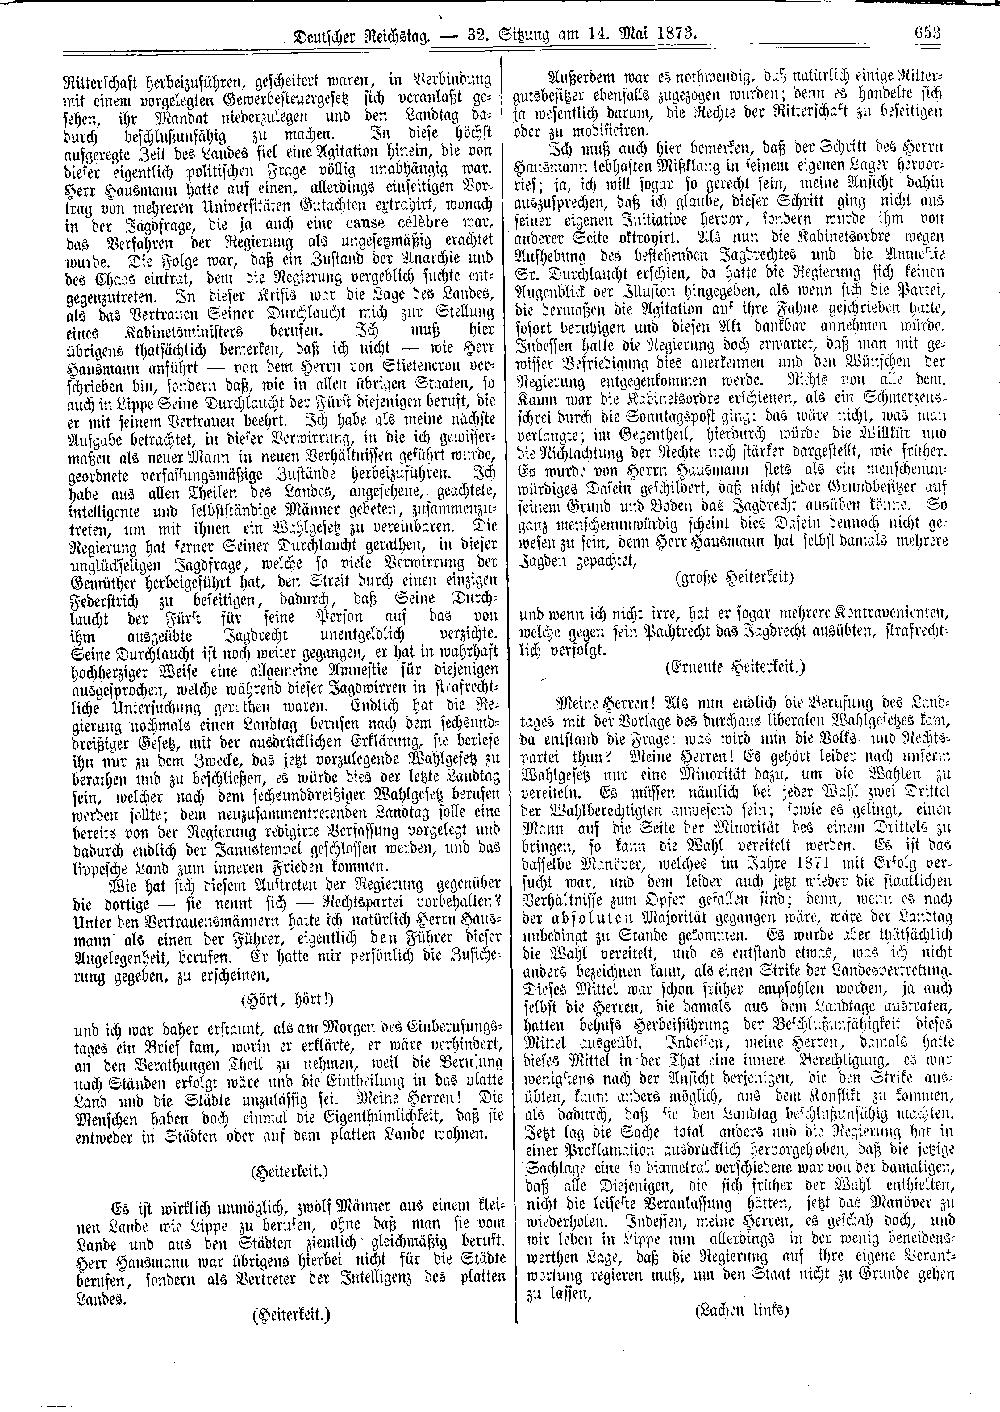 Scan of page 653